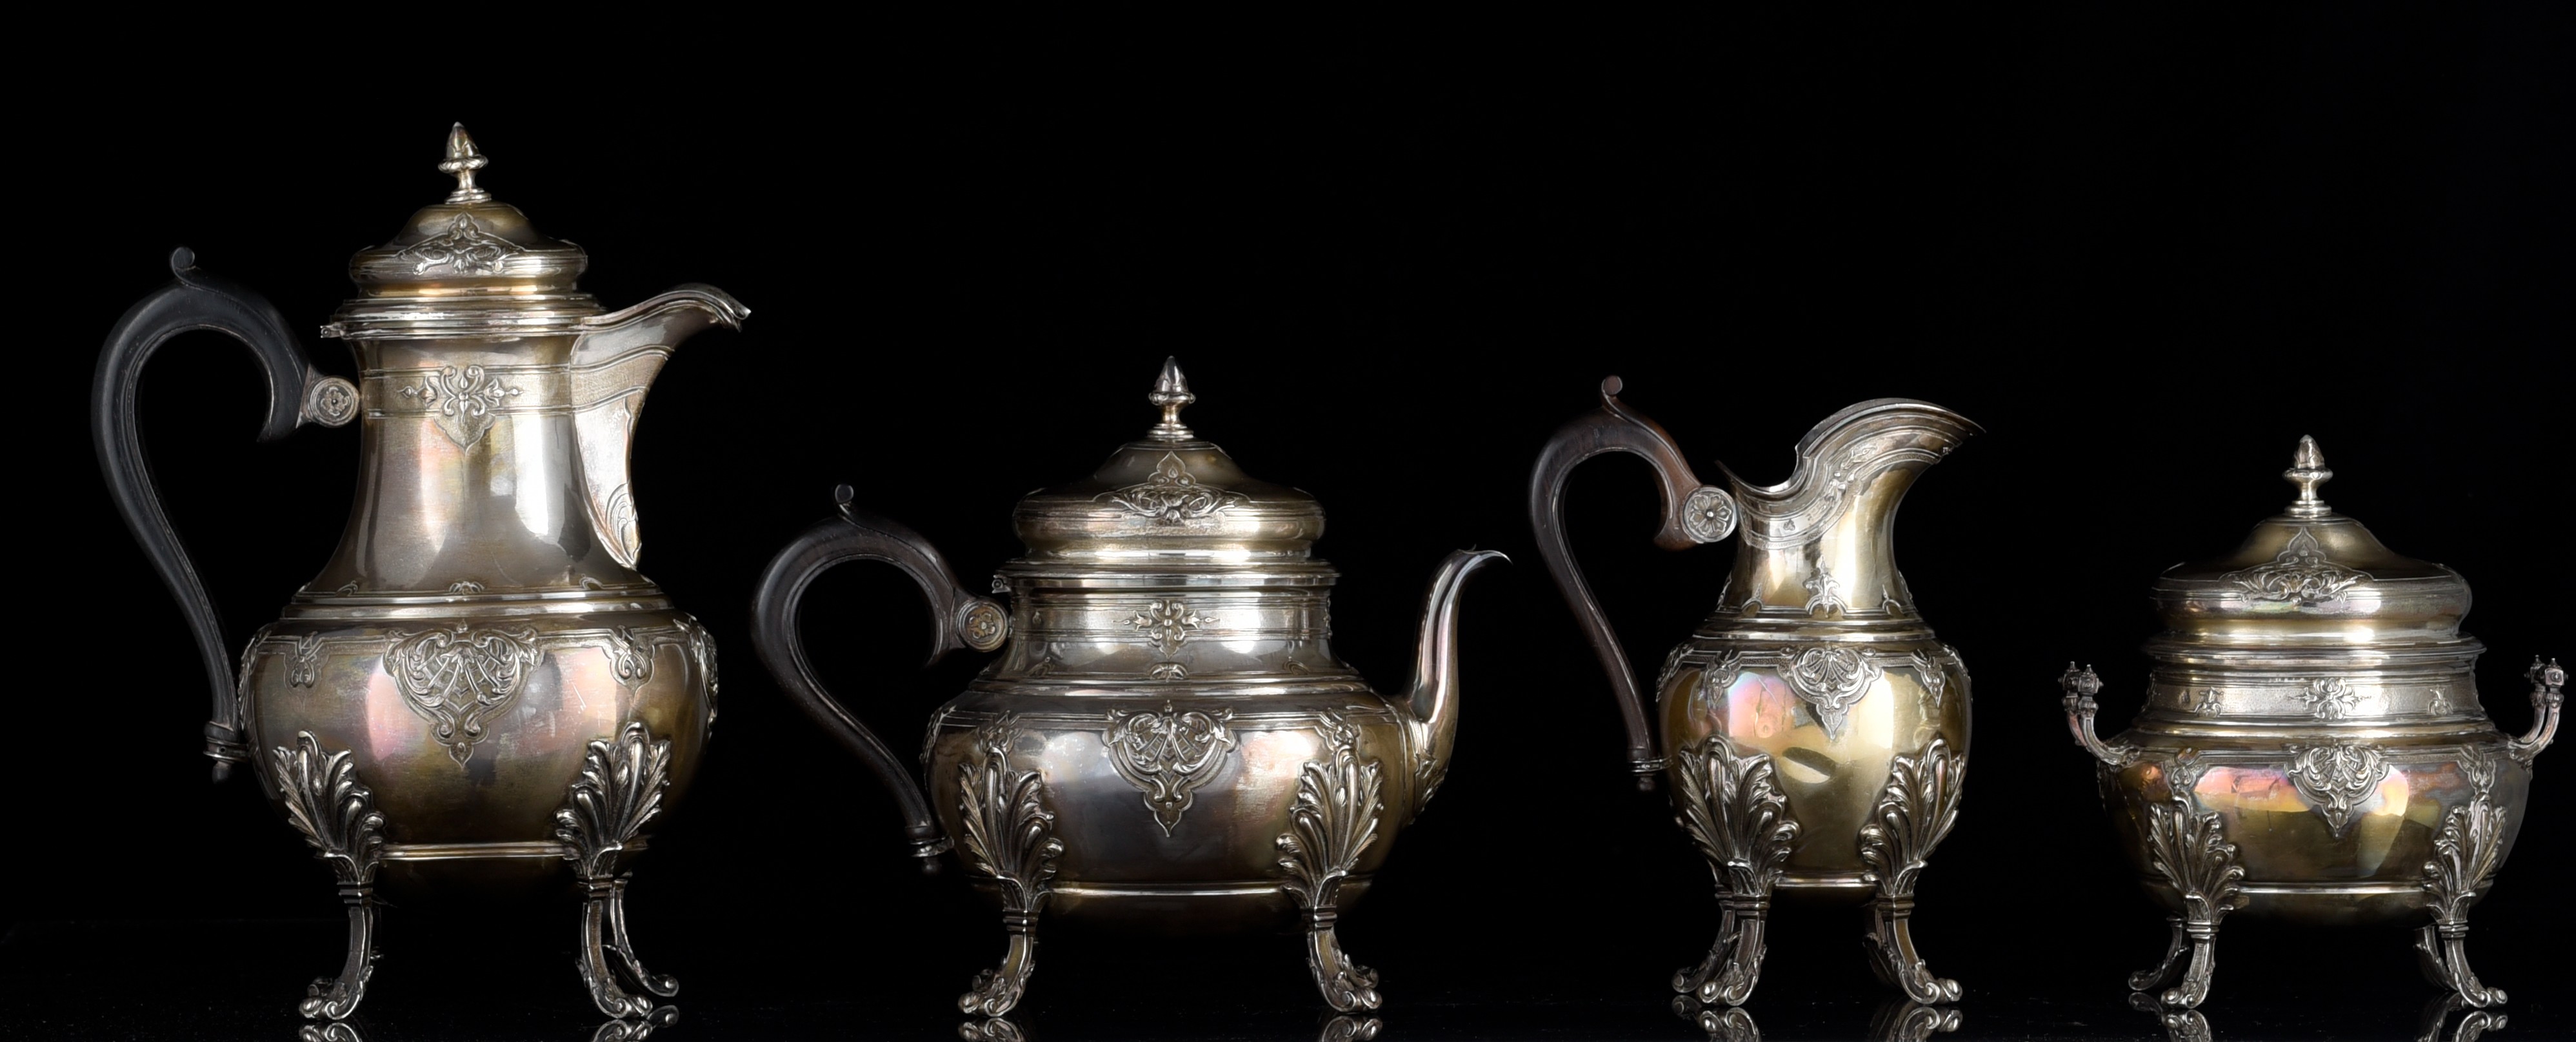 A French Régence style silver coffee and tea set, Georg Roth & Co, Hanau, late 19thC, H 18 - 29 cm - - Image 4 of 21